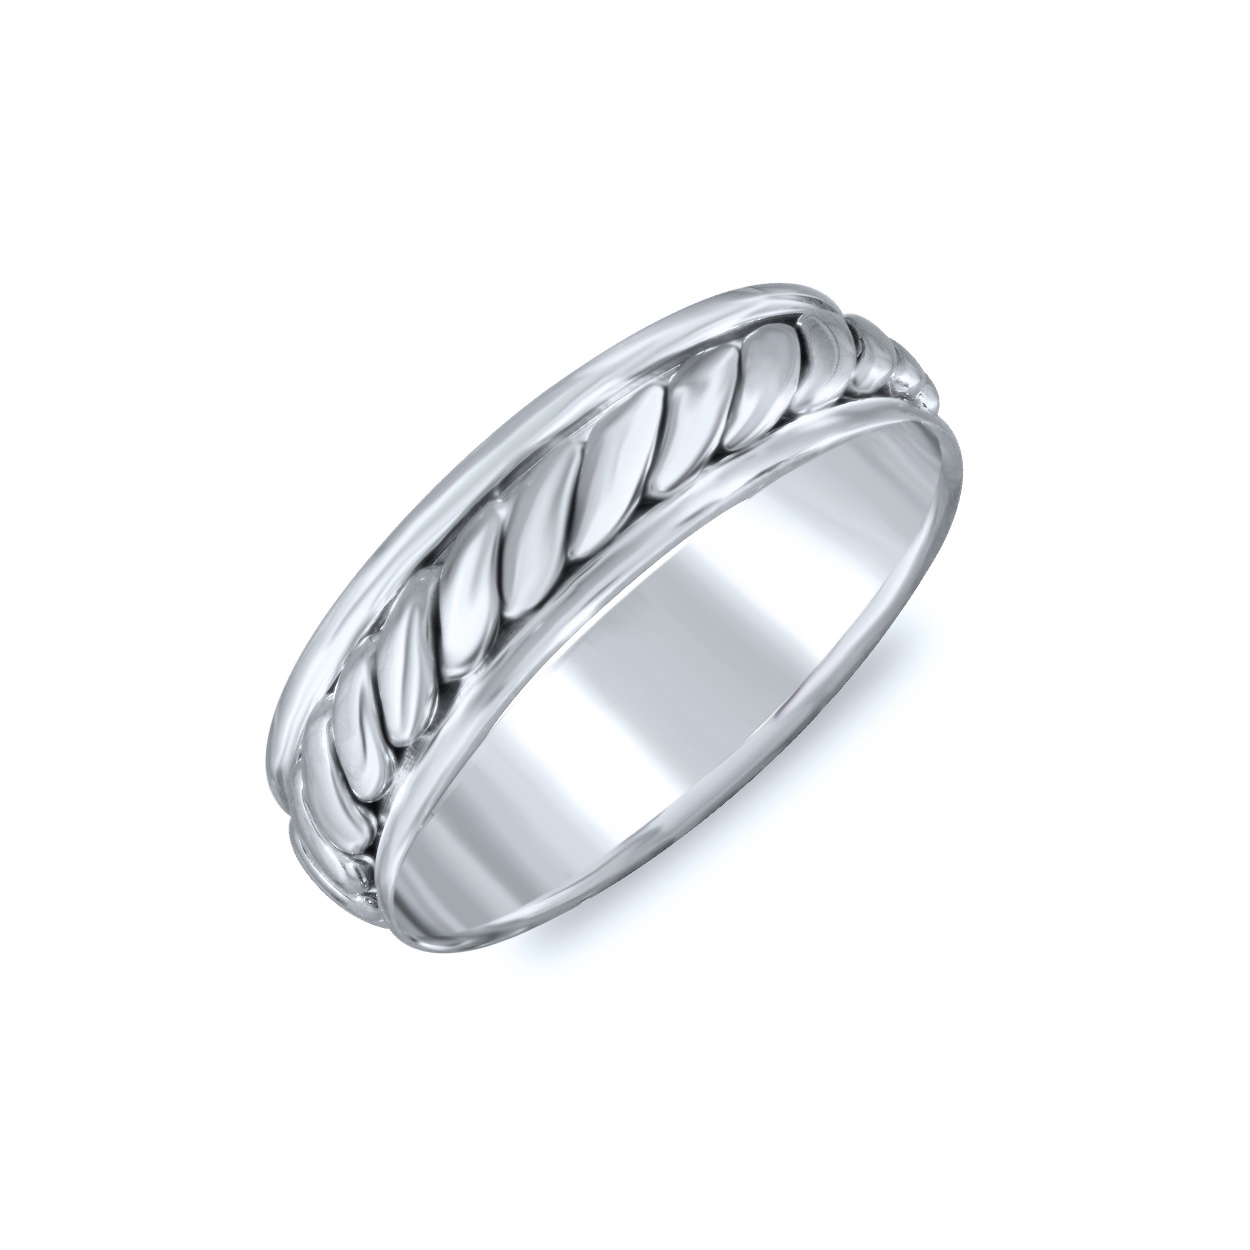 Rope Knot Wedding Ring. 6mm | Monte Christo Trade Corporation